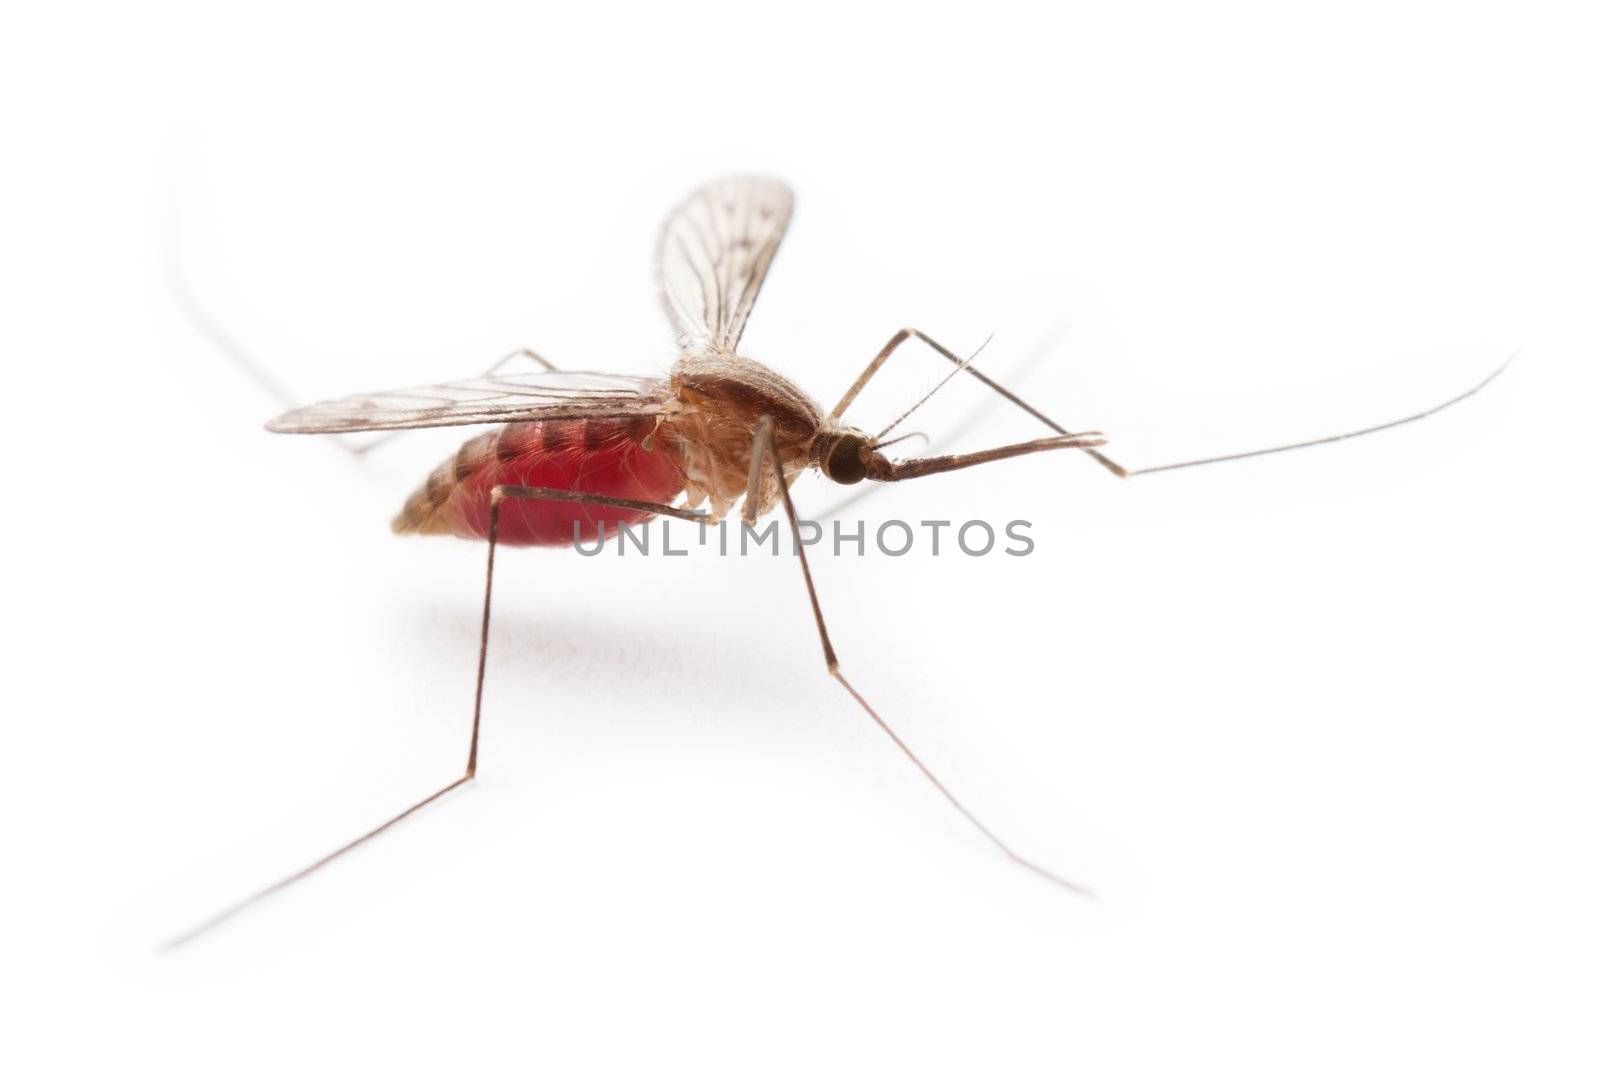 Gnat or mosquito insect by ia_64